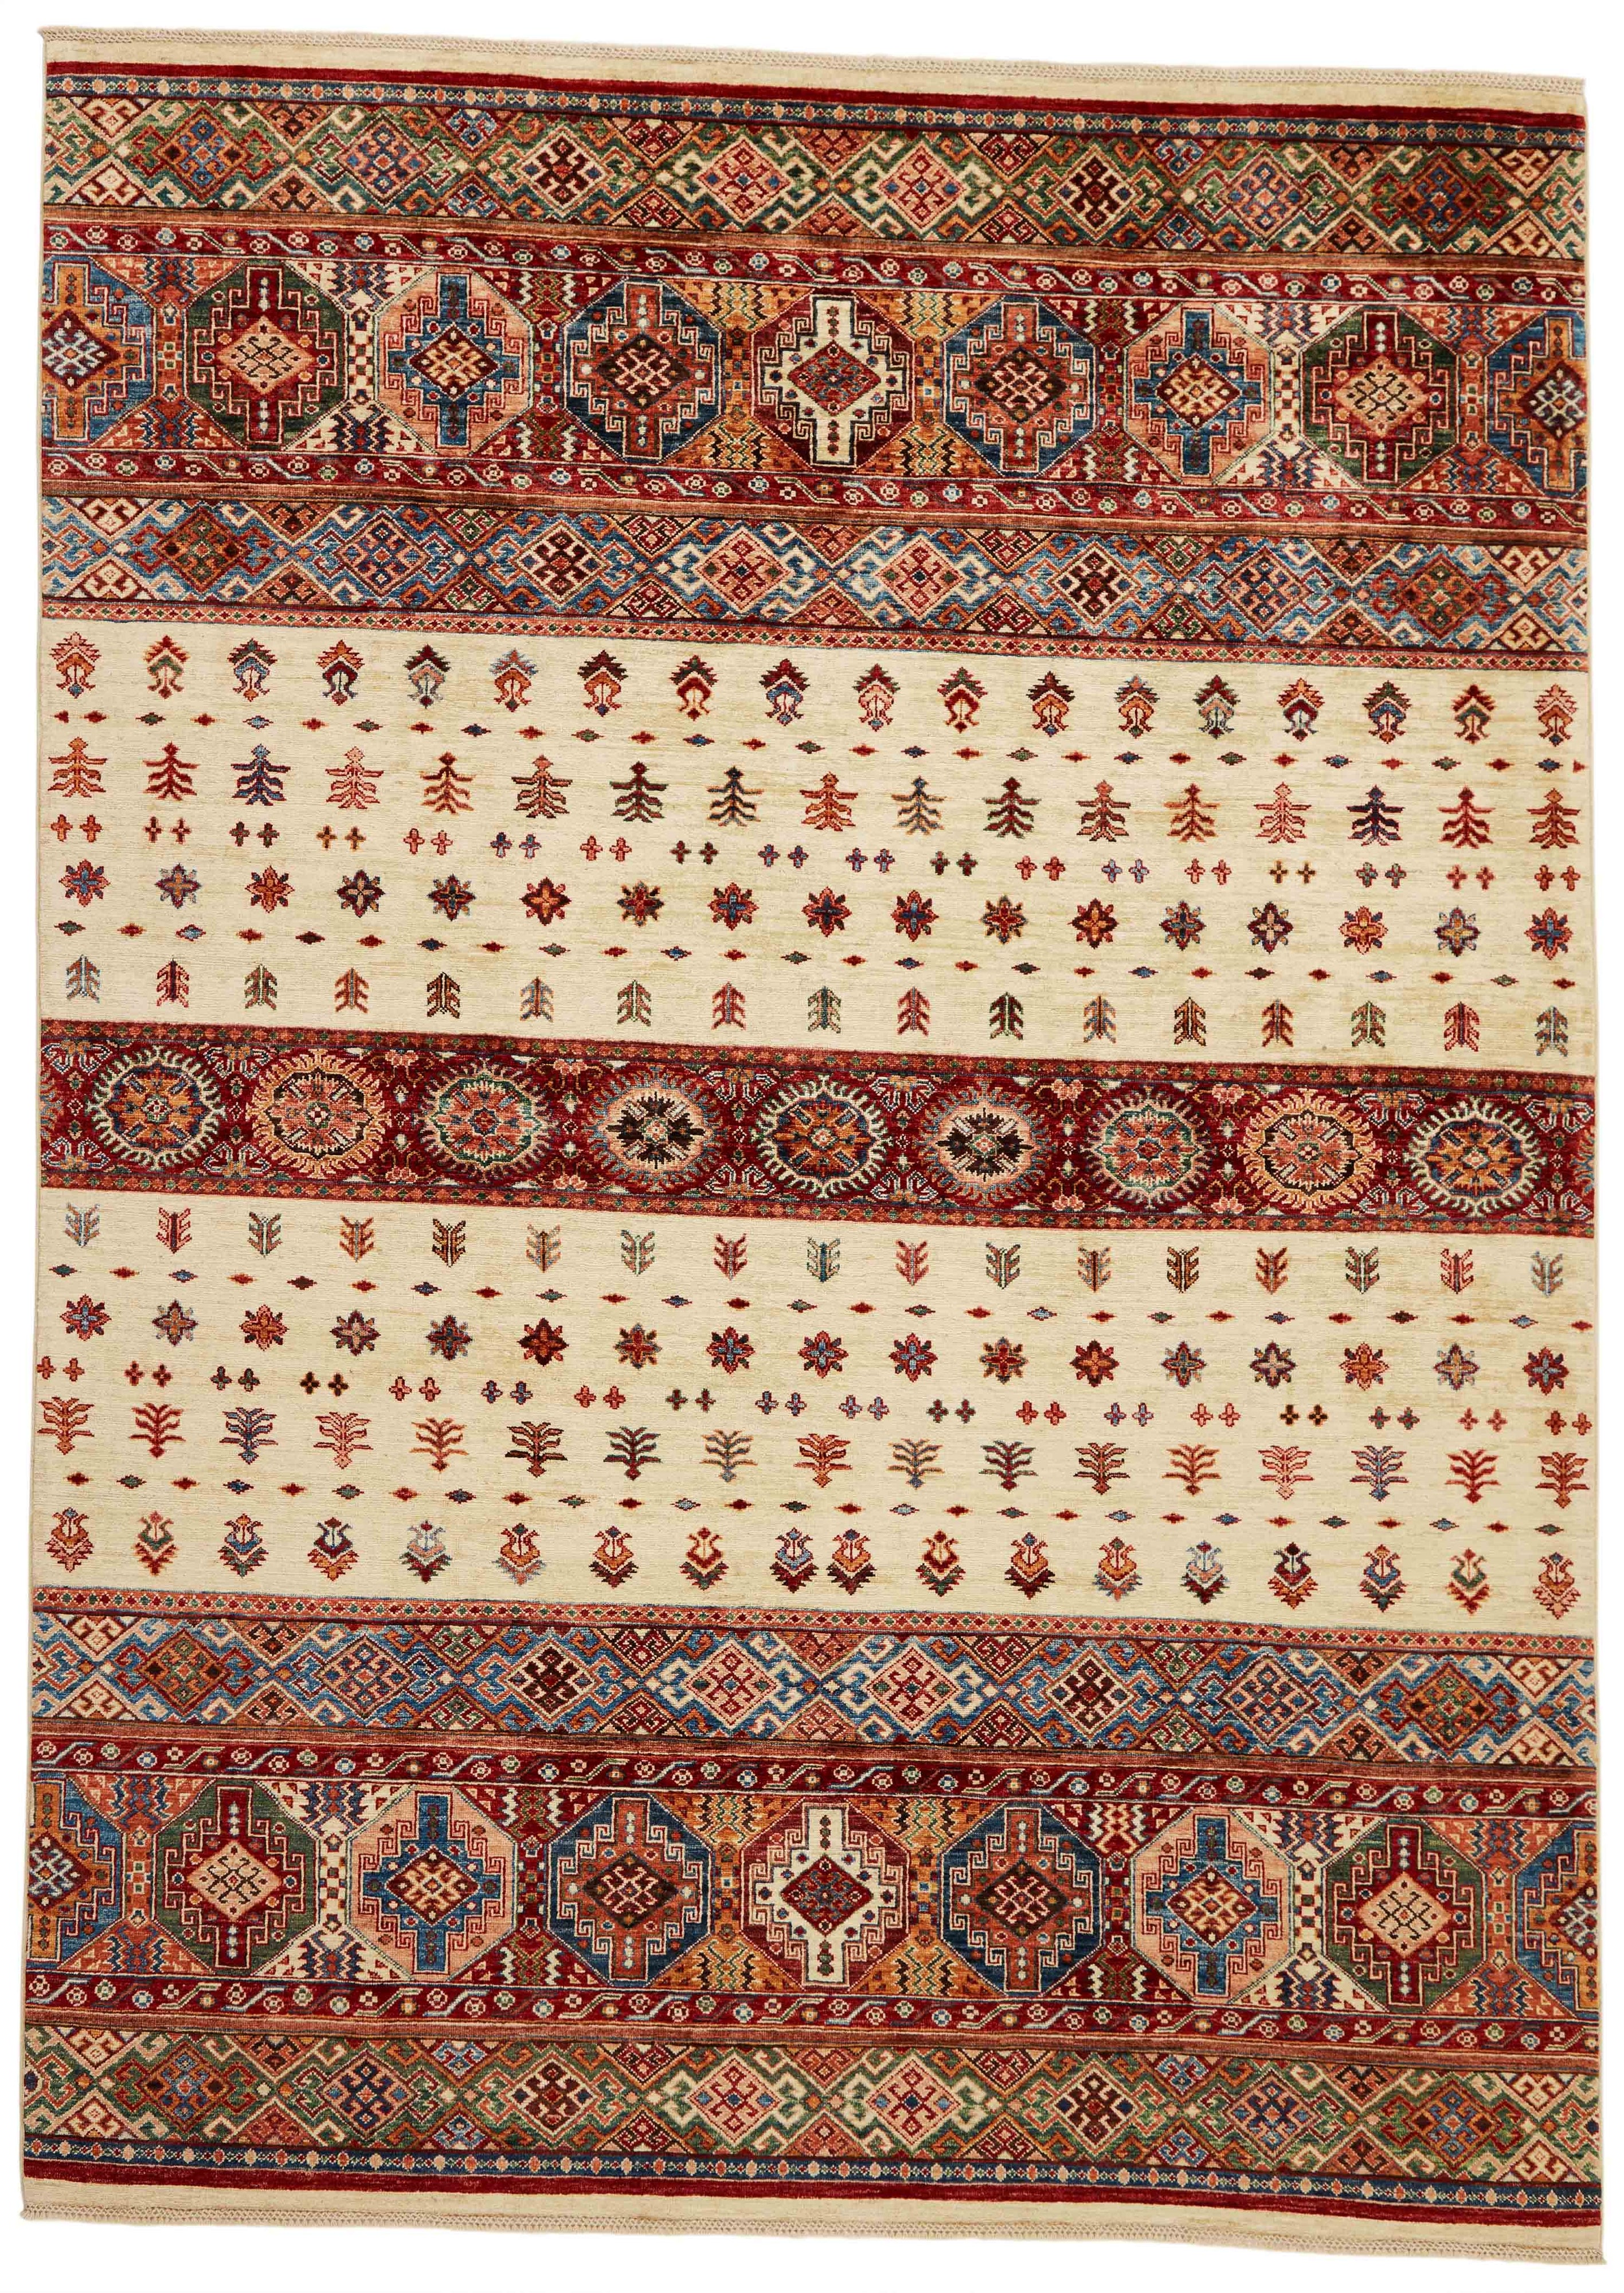 Authentic oriental rug with traditional tile pattern in red, orange, yellow, blue, green, beige and brown